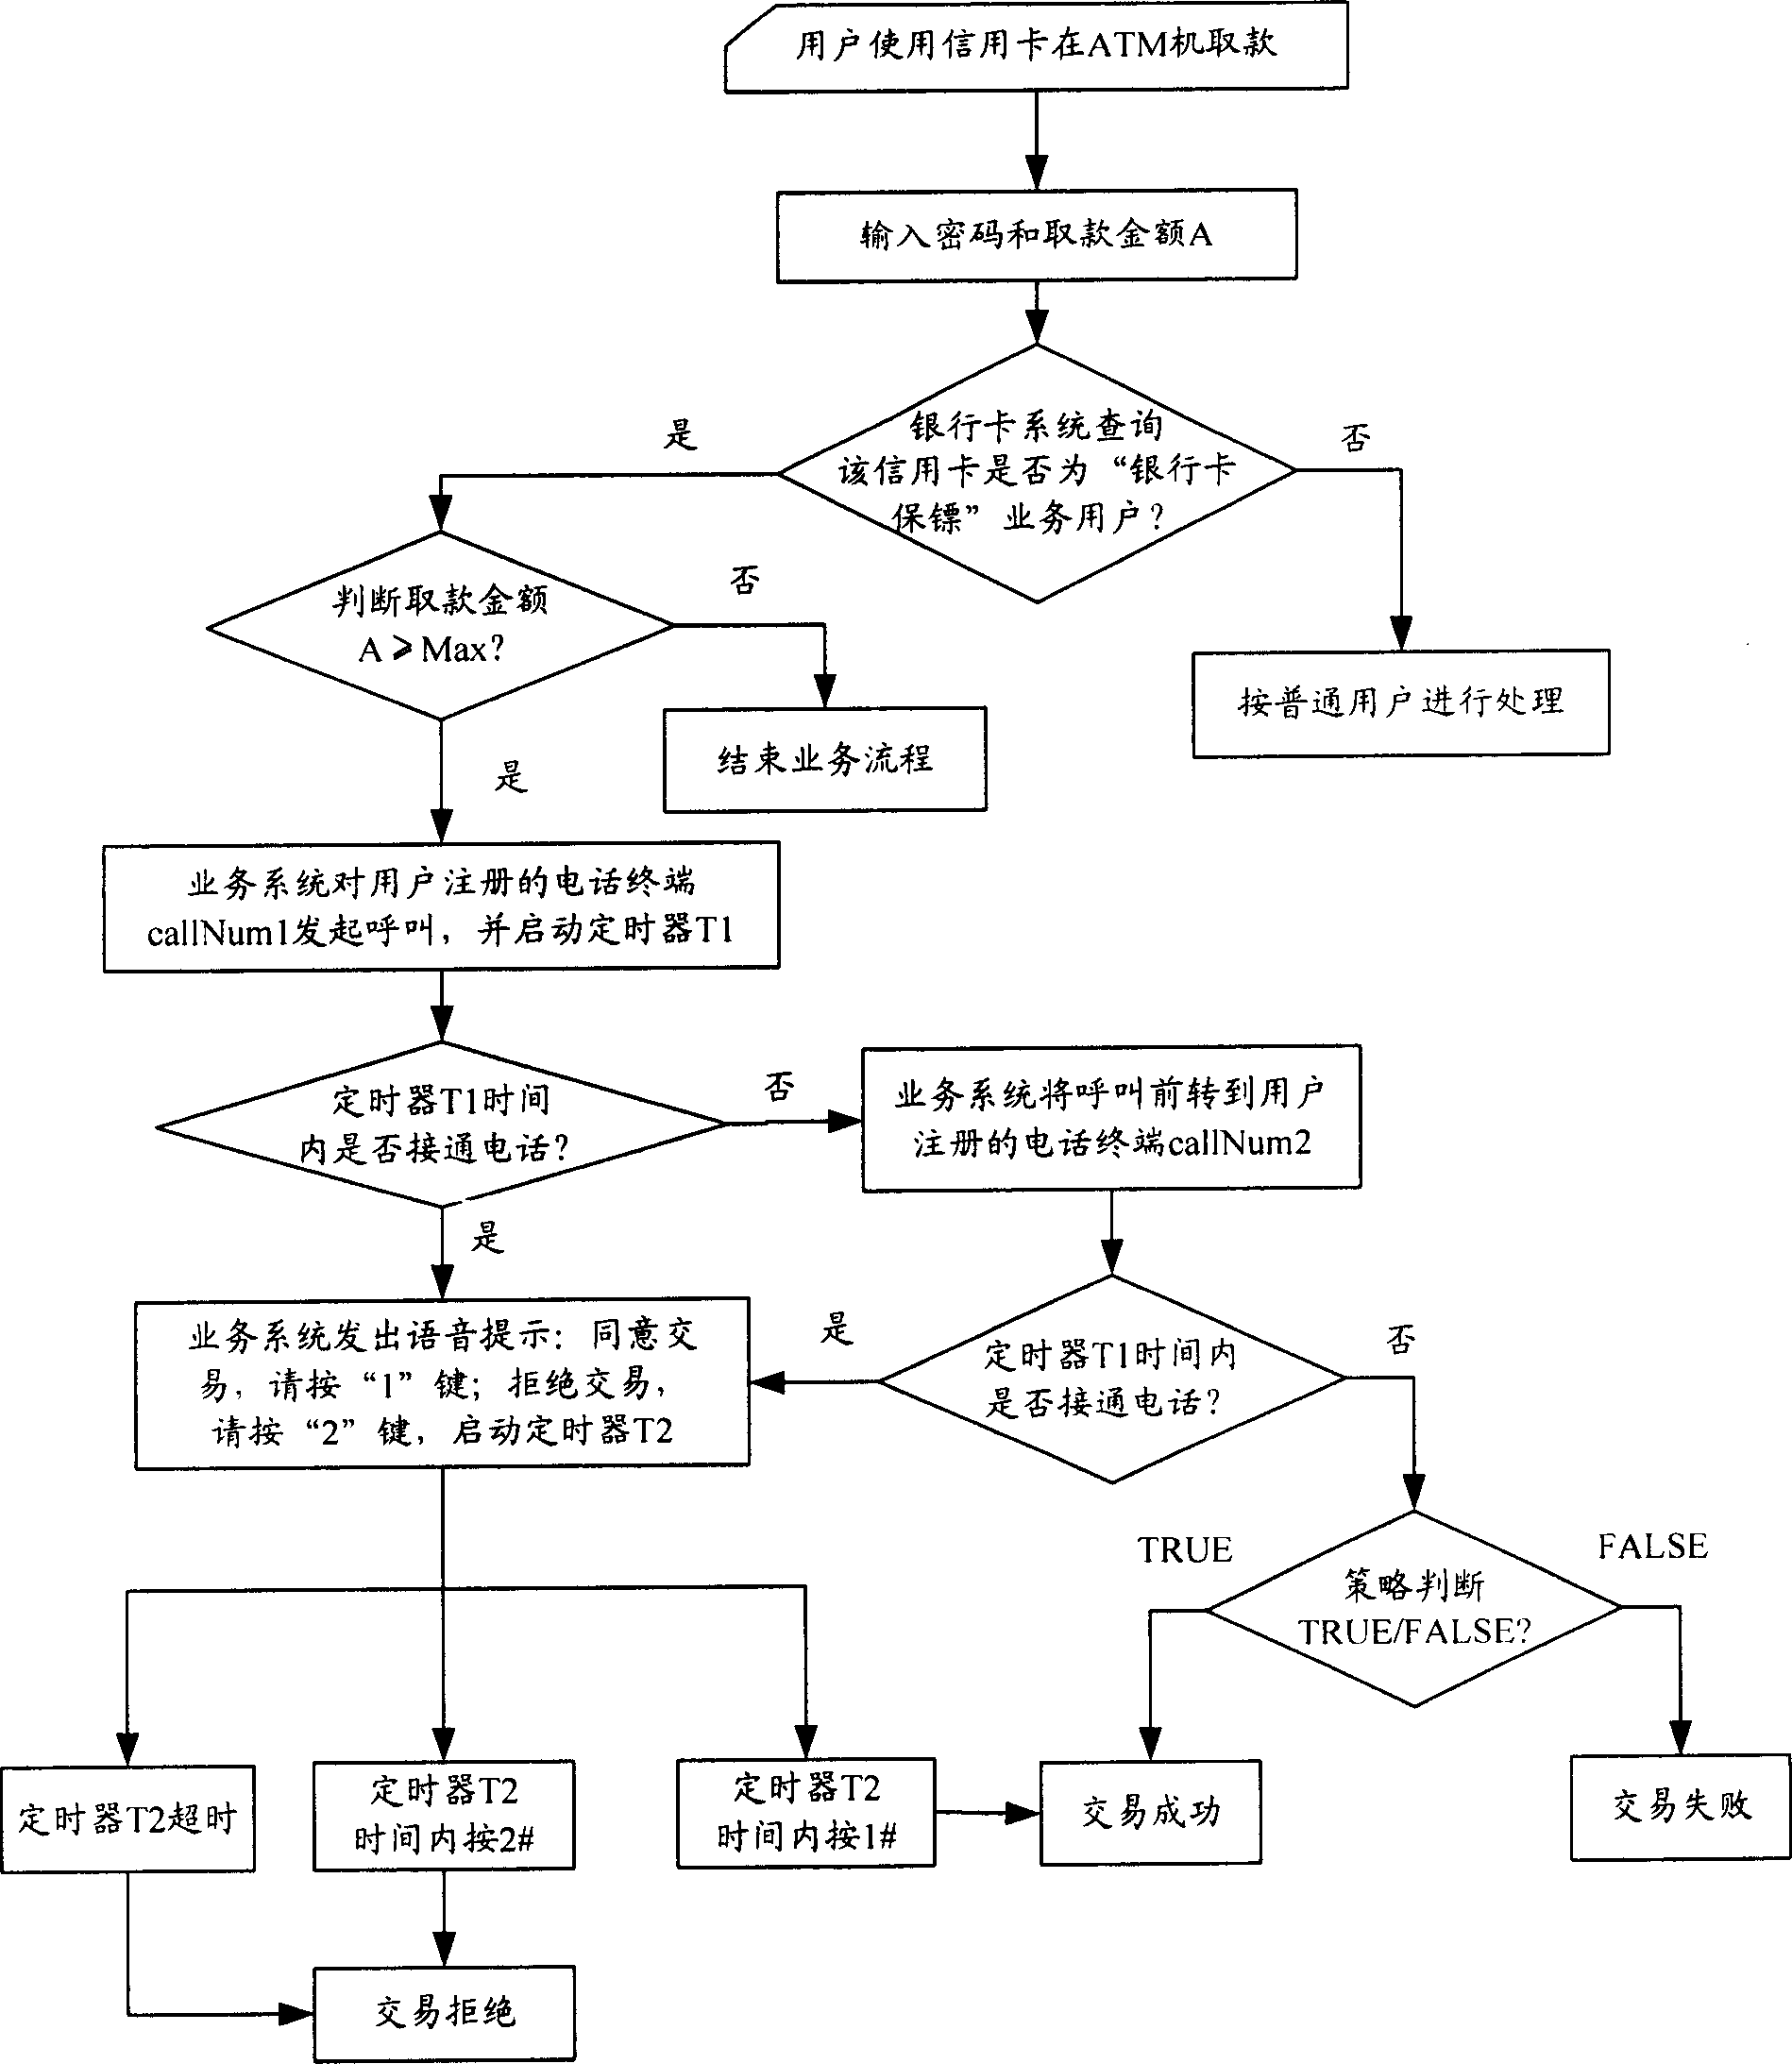 Method for real-time authorization of bank card transaction based on interactive voice response